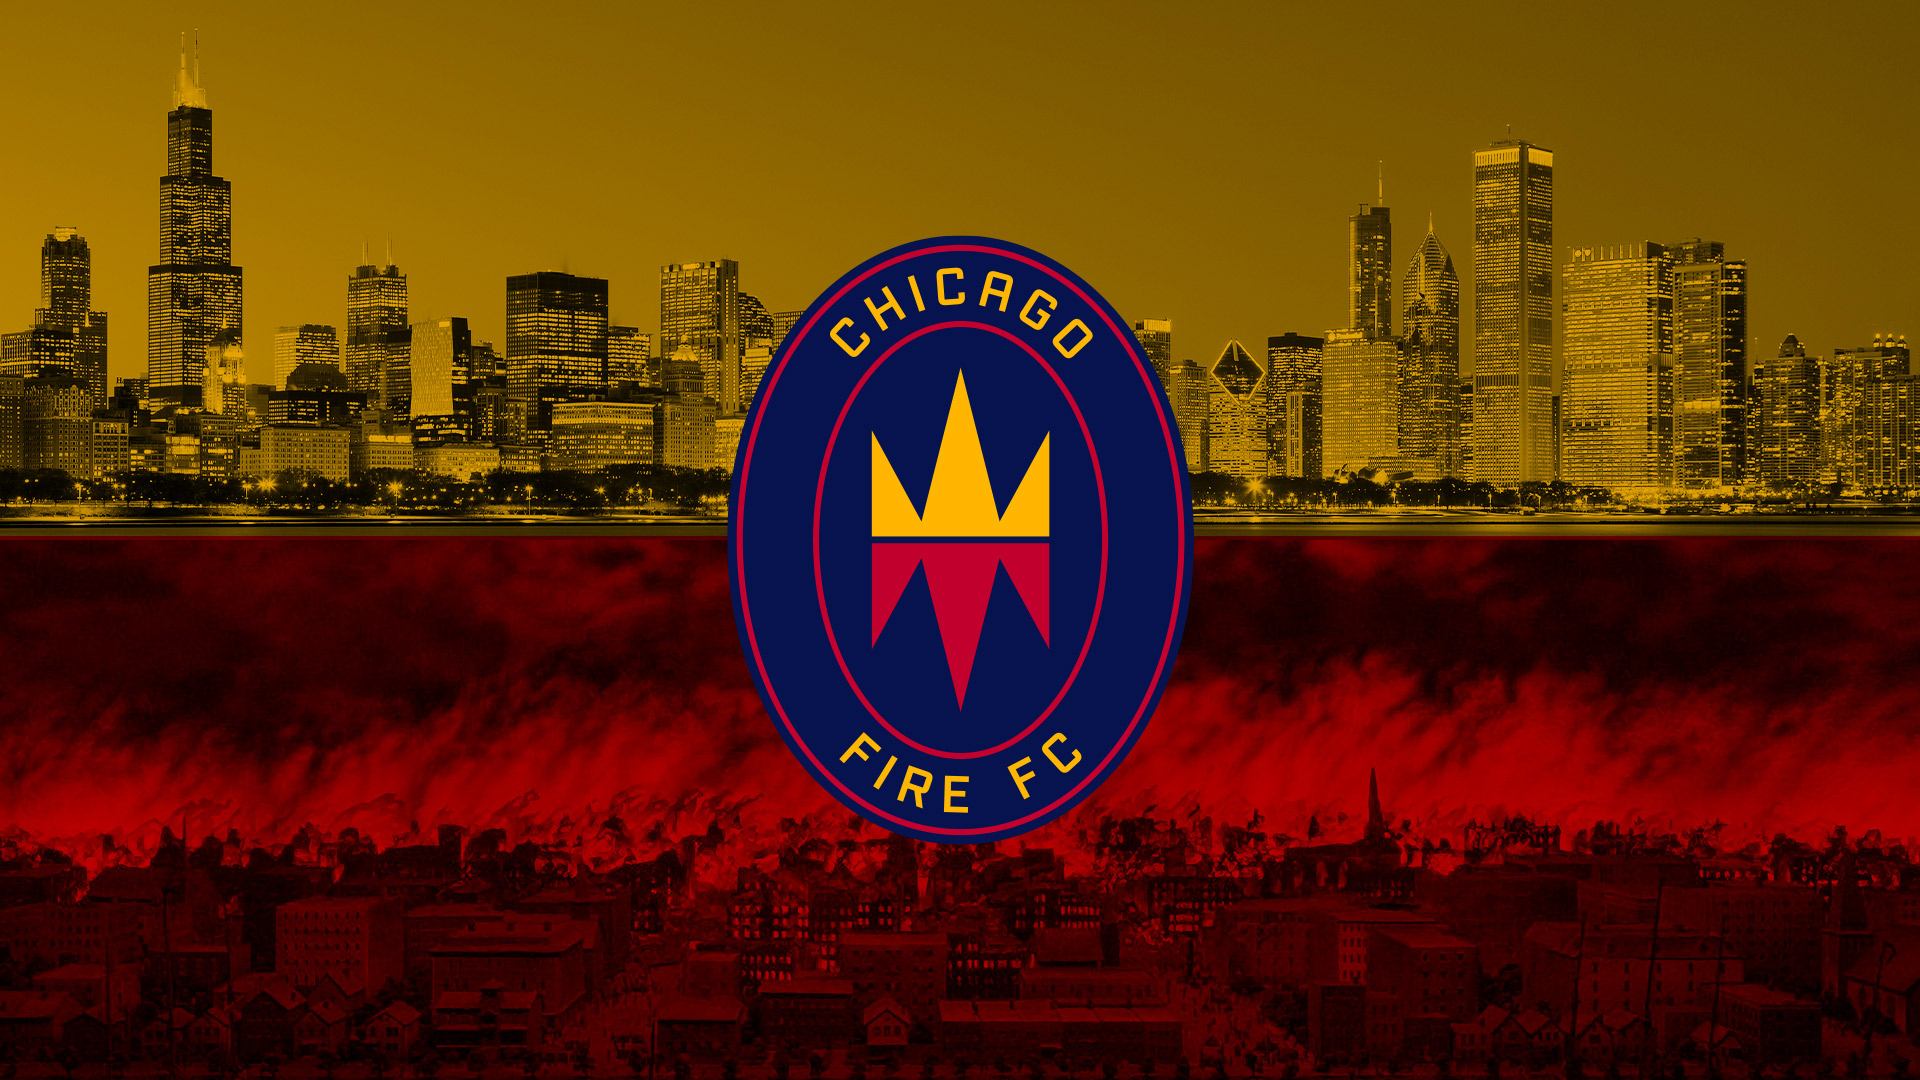 Chicago Fire FC Badge – Visual, Quelle: Chicago Fire FC